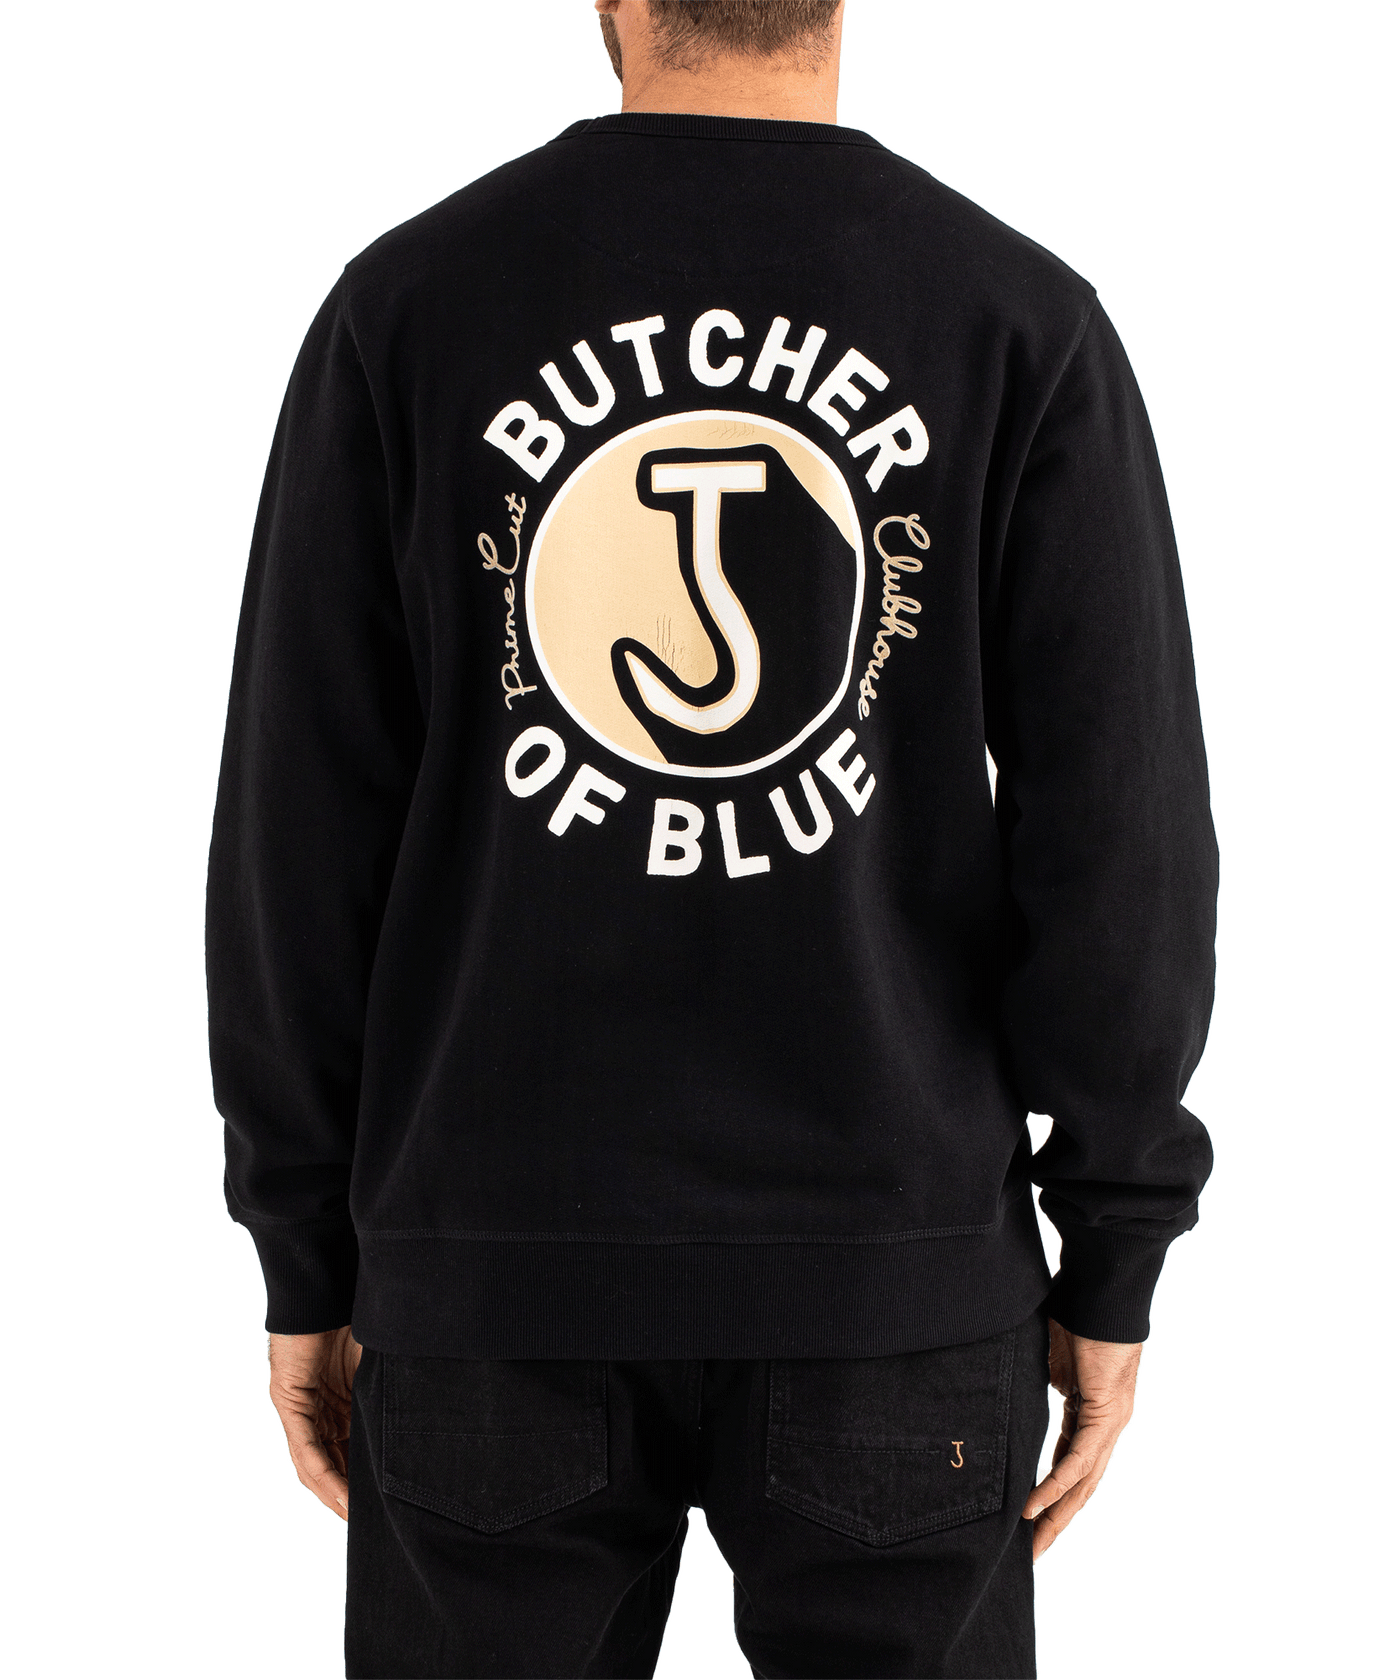 Butcher of Blue - M2323010 - Army Clubhouse Crew - 998 Montego Black